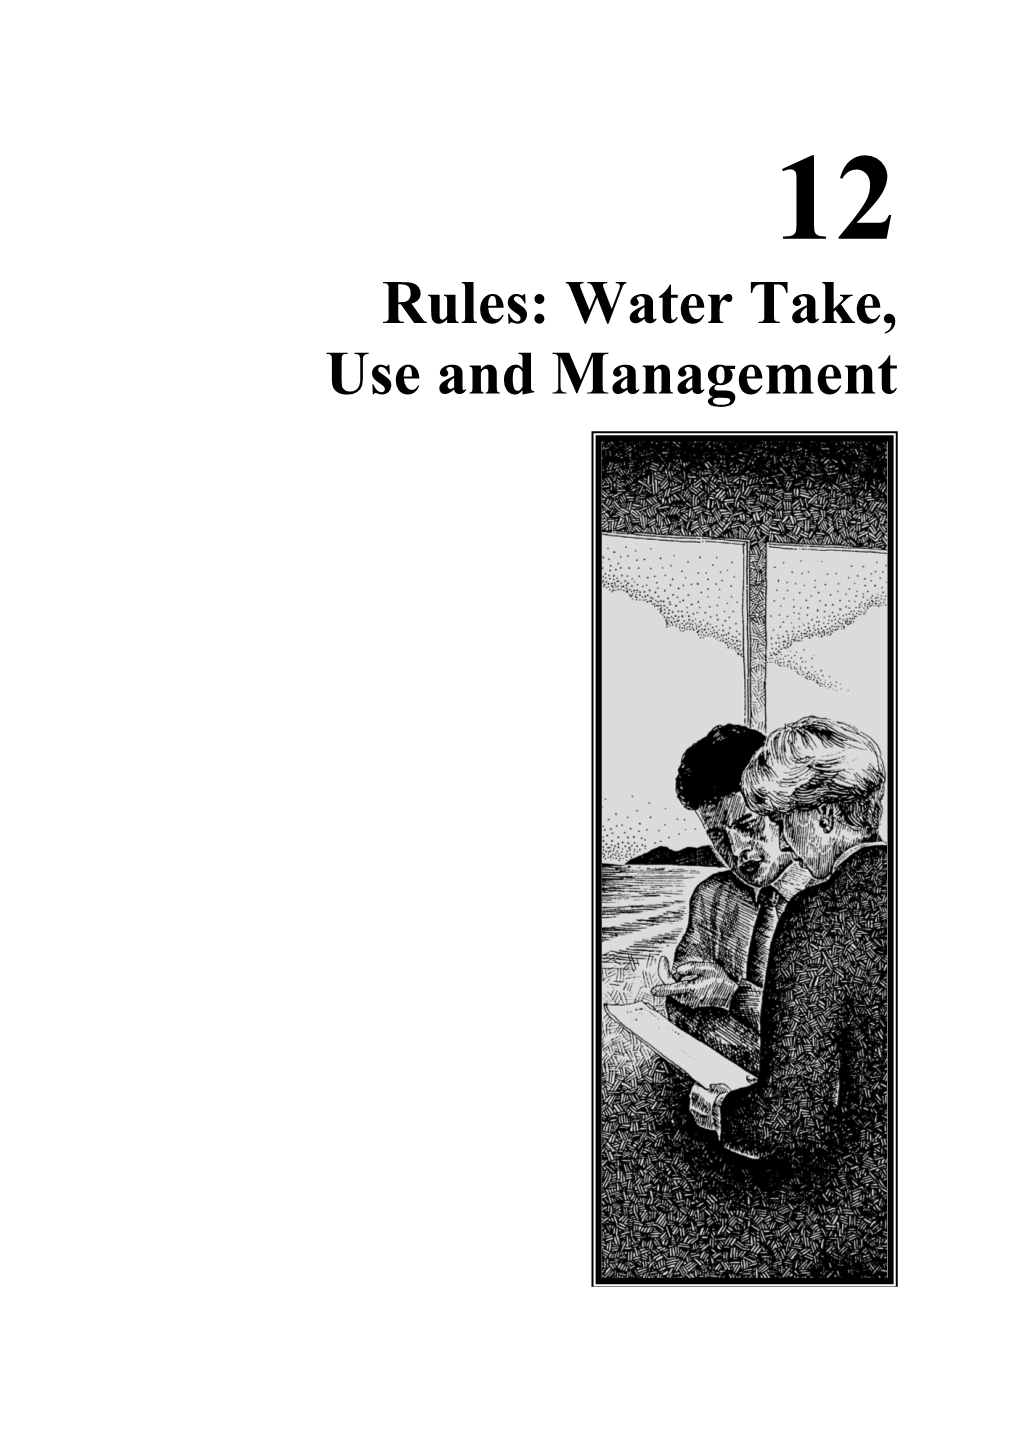 Rules: Water Take, Use and Management R ULES: W ATER TAKE, USE and MANAGEMENT